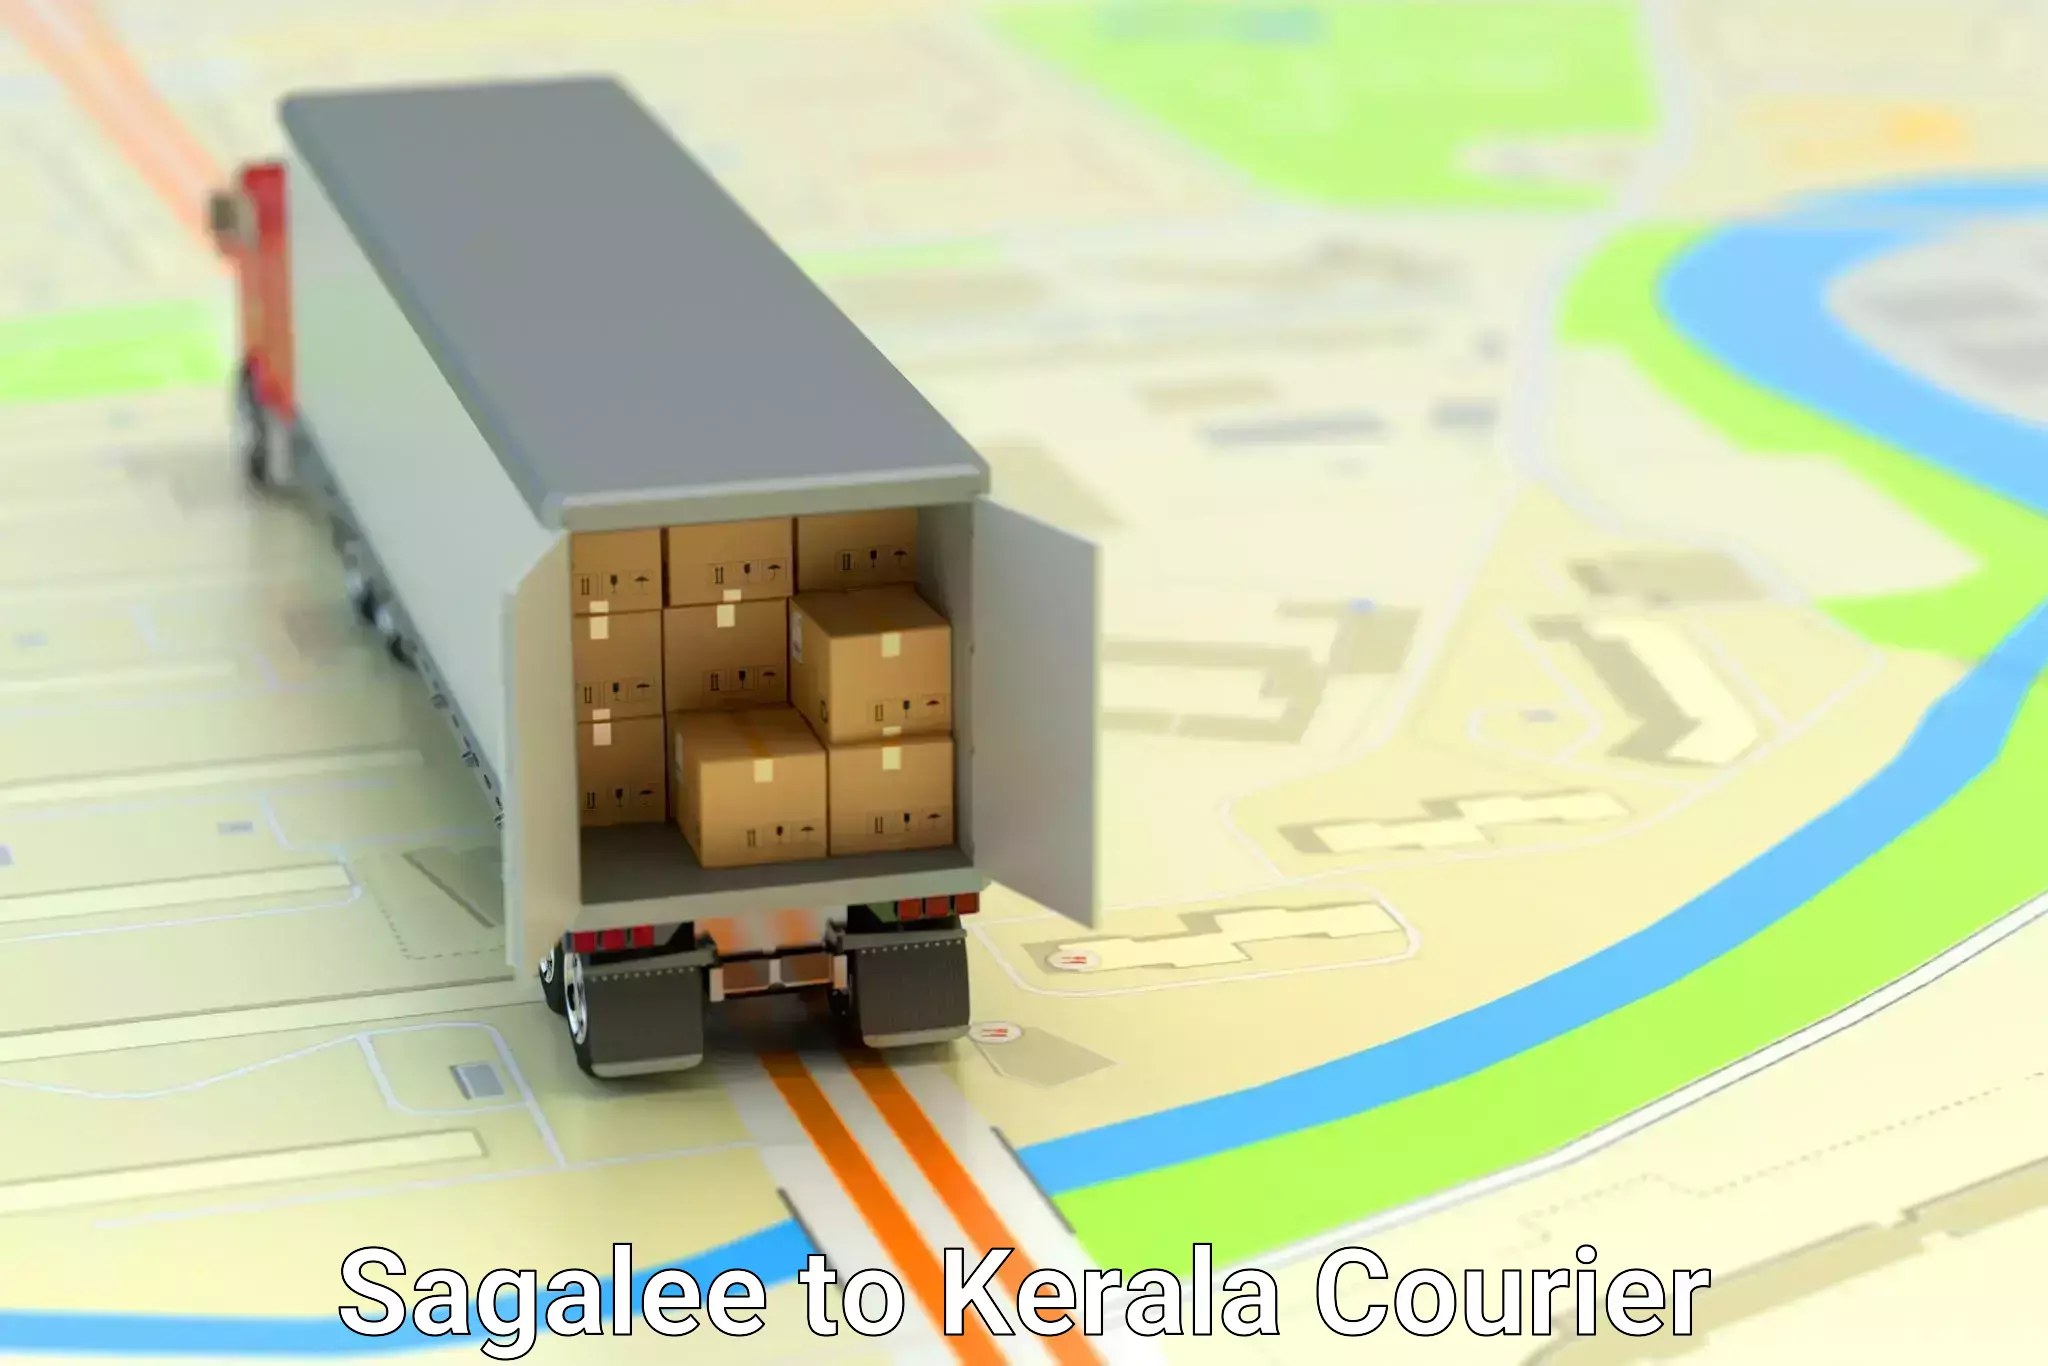 Next-day freight services Sagalee to Kerala